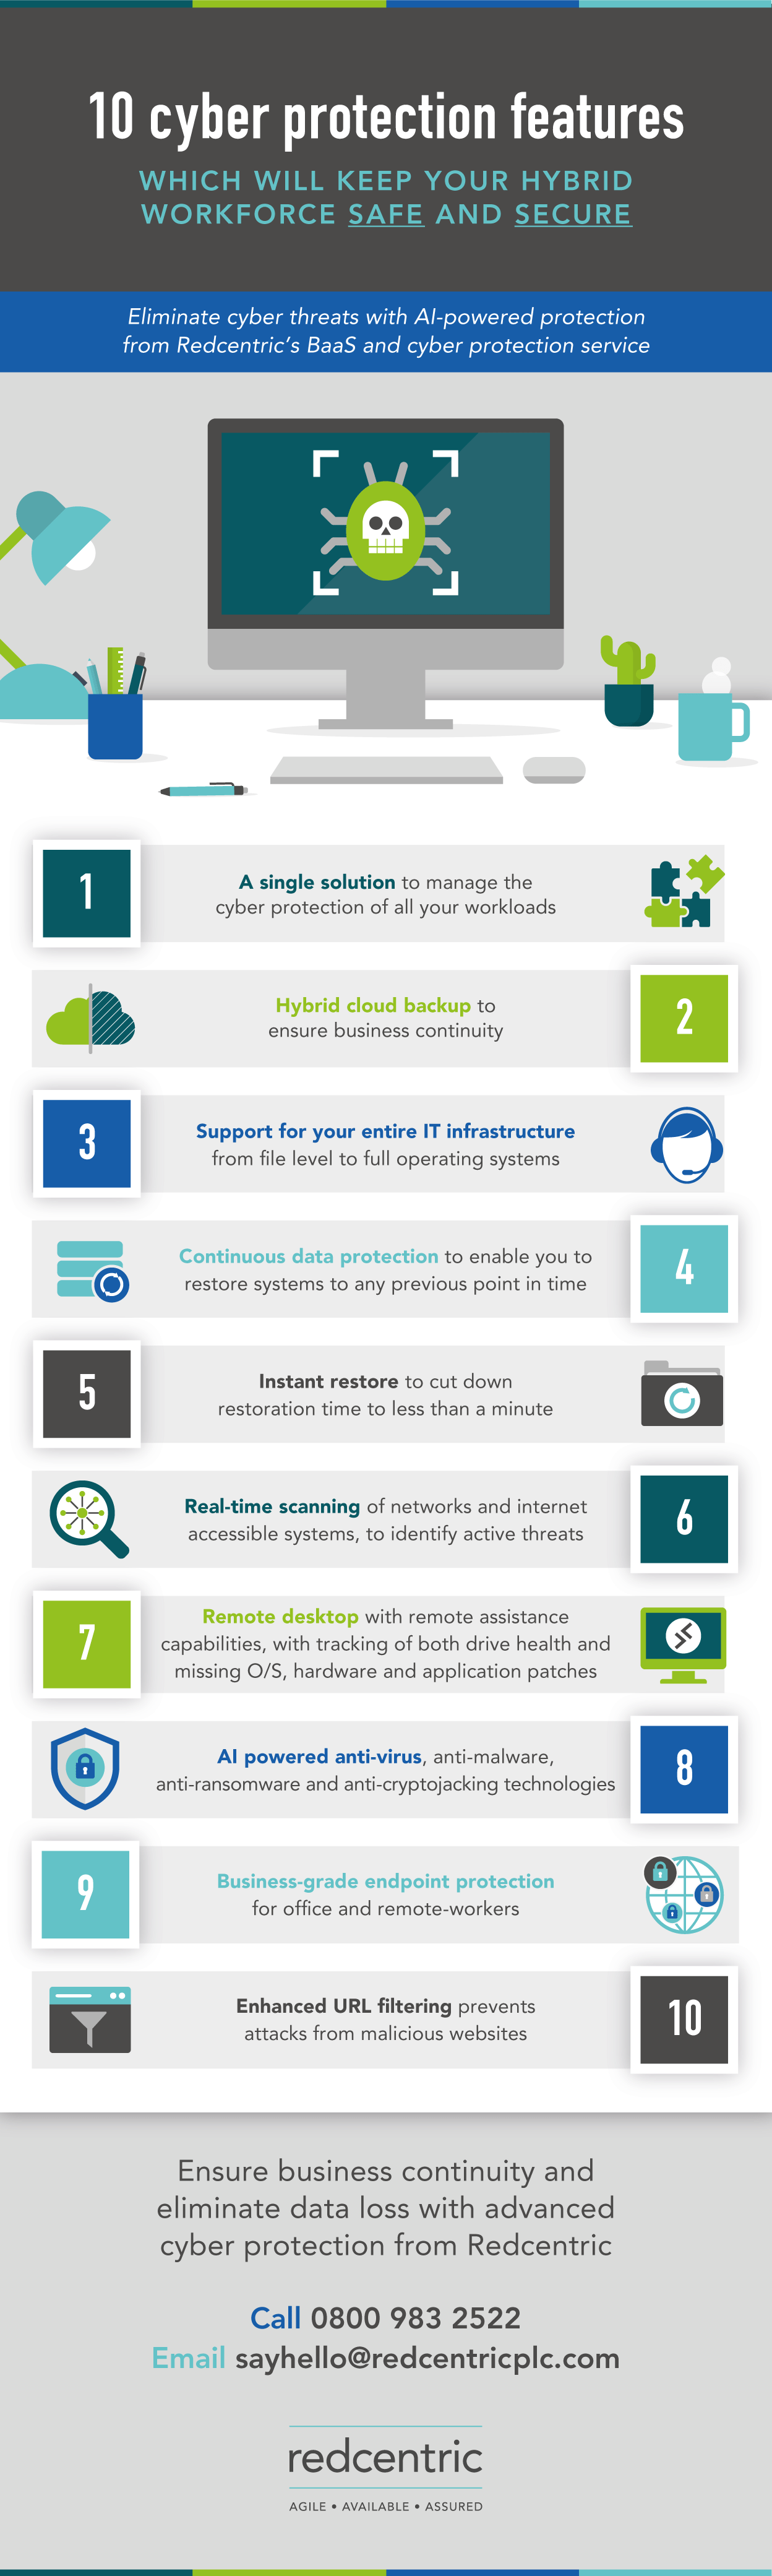 10 cyber protection features infographic